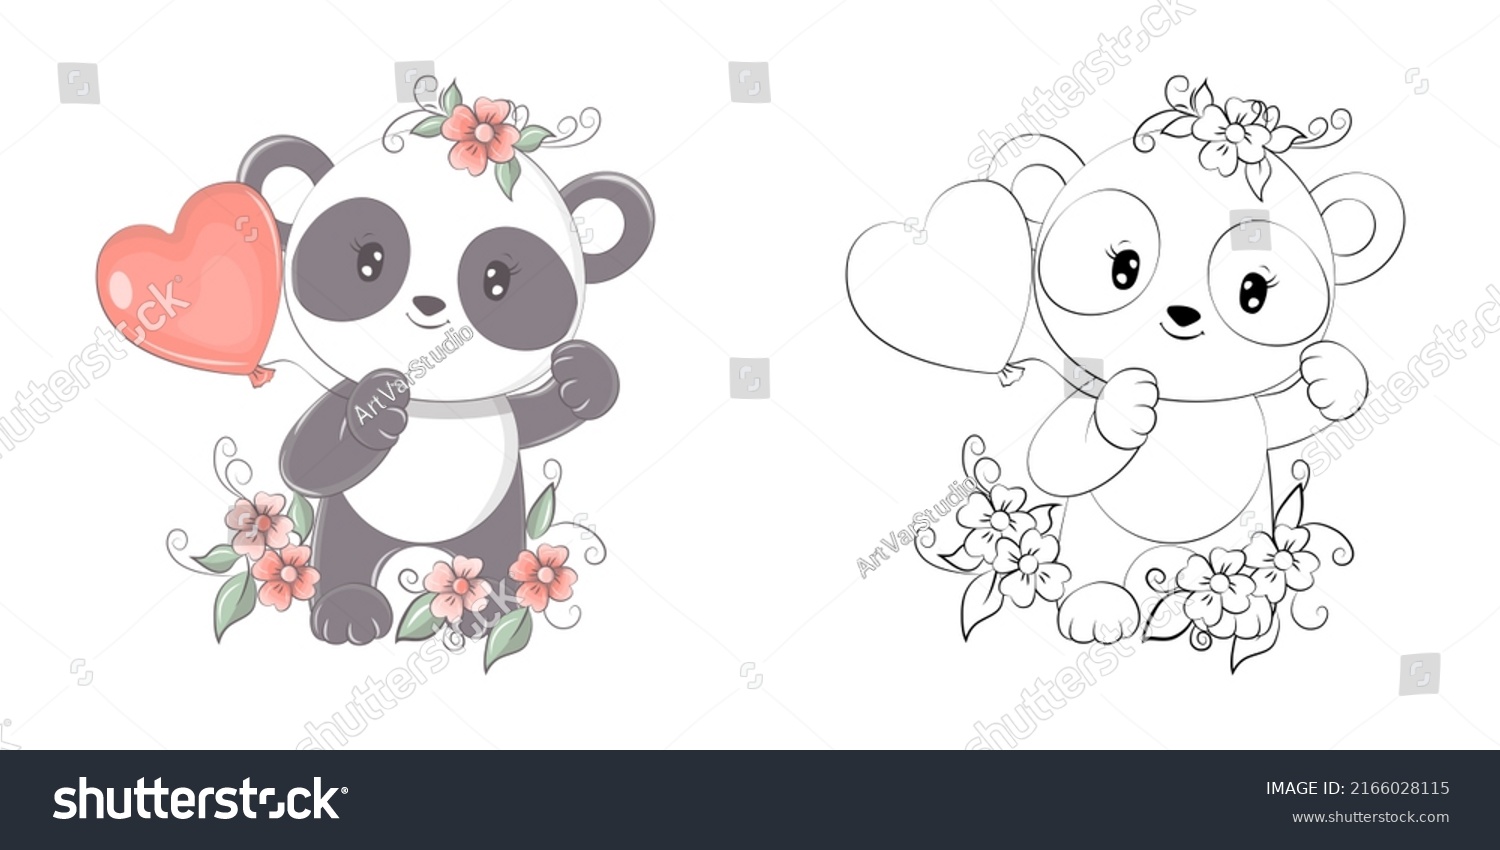 SVG of Cute Clipart Panda Illustration and For Coloring Page. Cartoon Clip Art Panda with Balloon. Vector Illustration of an Animal for Stickers, Baby Shower, Coloring Pages, Prints for Clothes.  svg